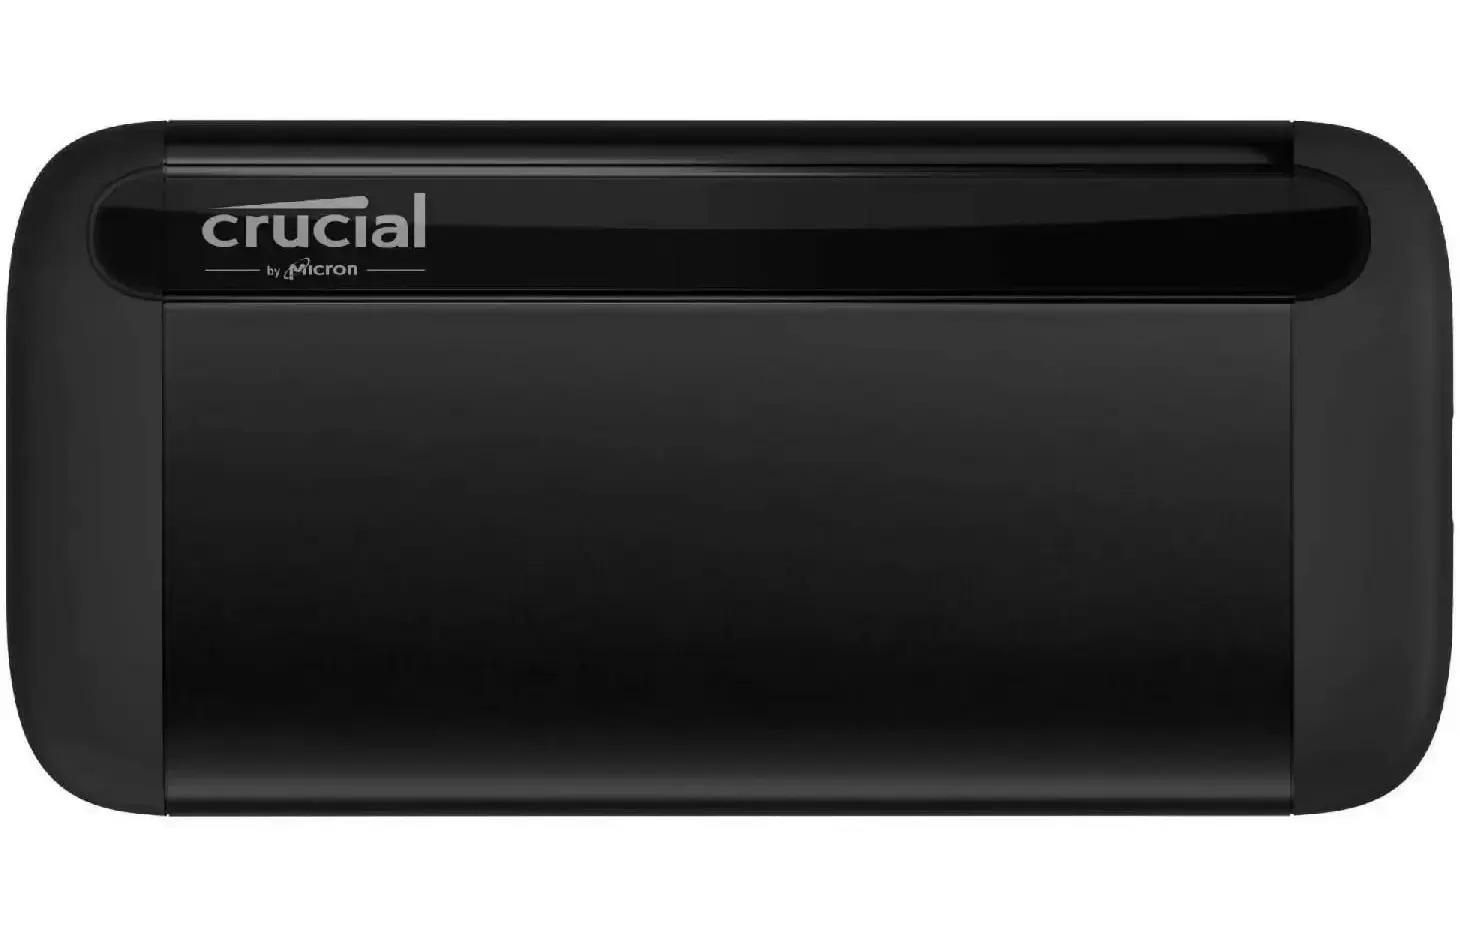 2TB Crucial X8 Portable Solid State Drive for $132.99 Shipped